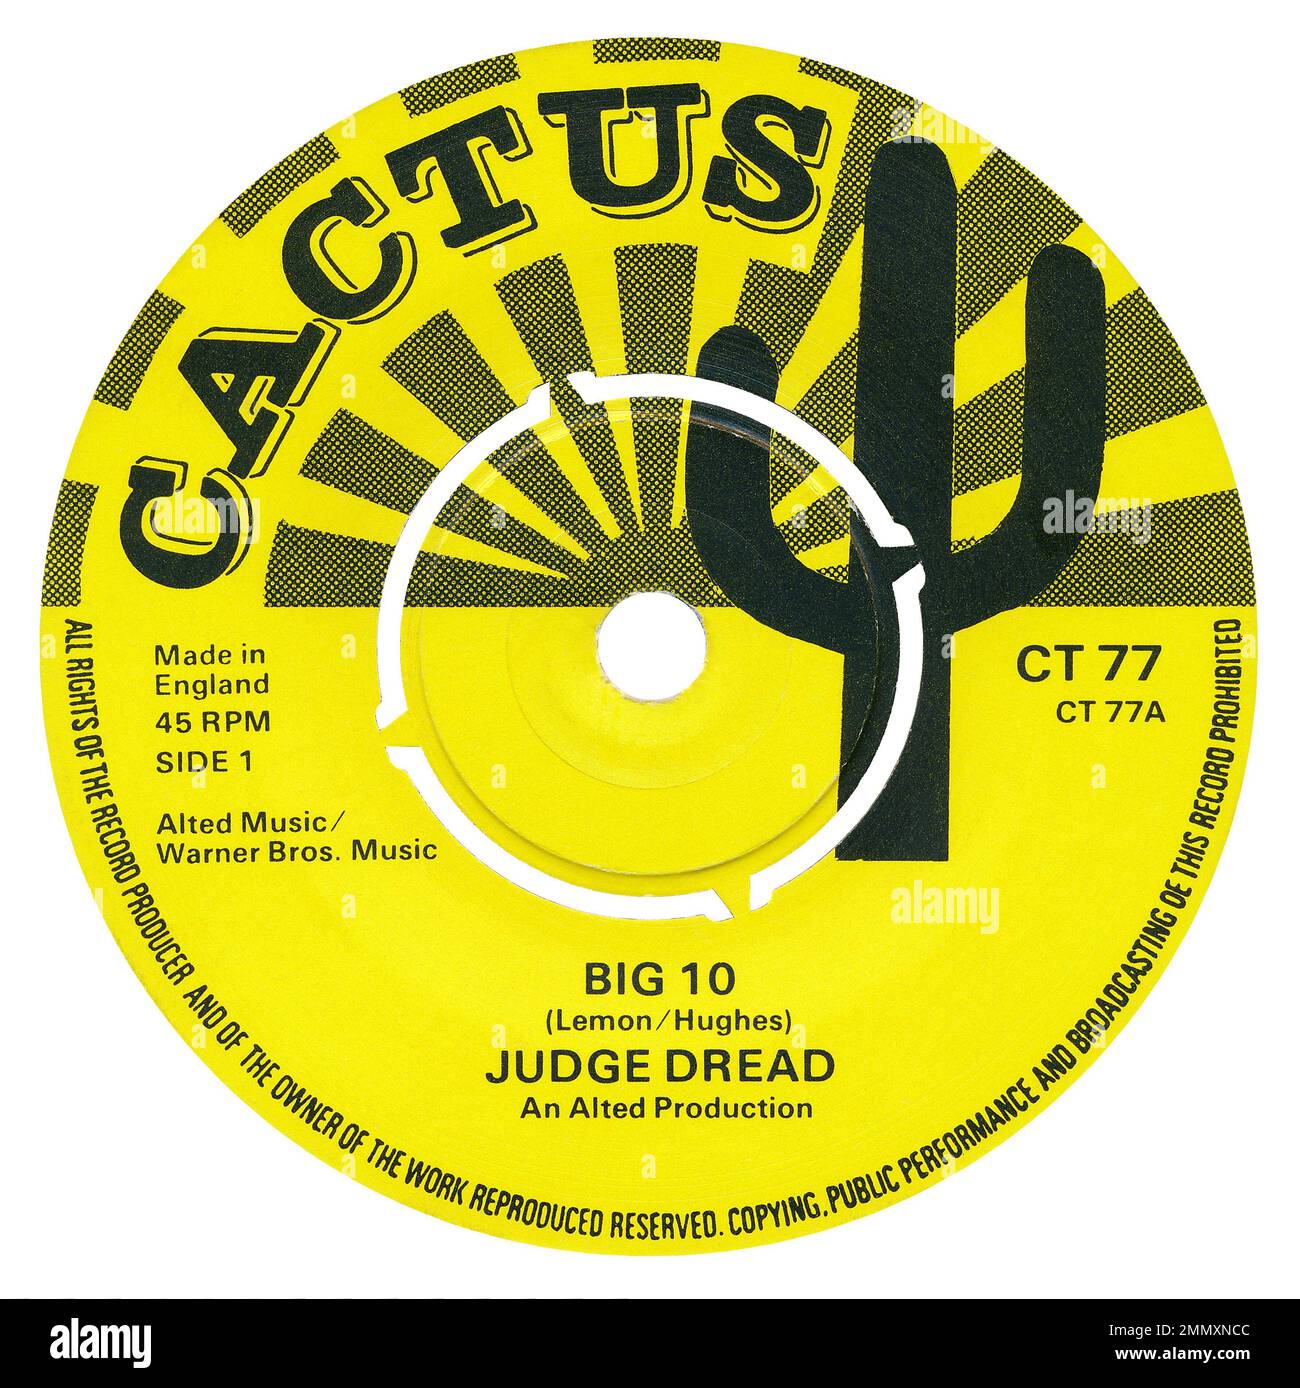 45 RPM 7' UK reggae record label of Big 10 by Judge Dread. Written by Lemon and Alexander Hughes (aka Judge Dread). Released in September 1975 on the Cactus label. Stock Photo